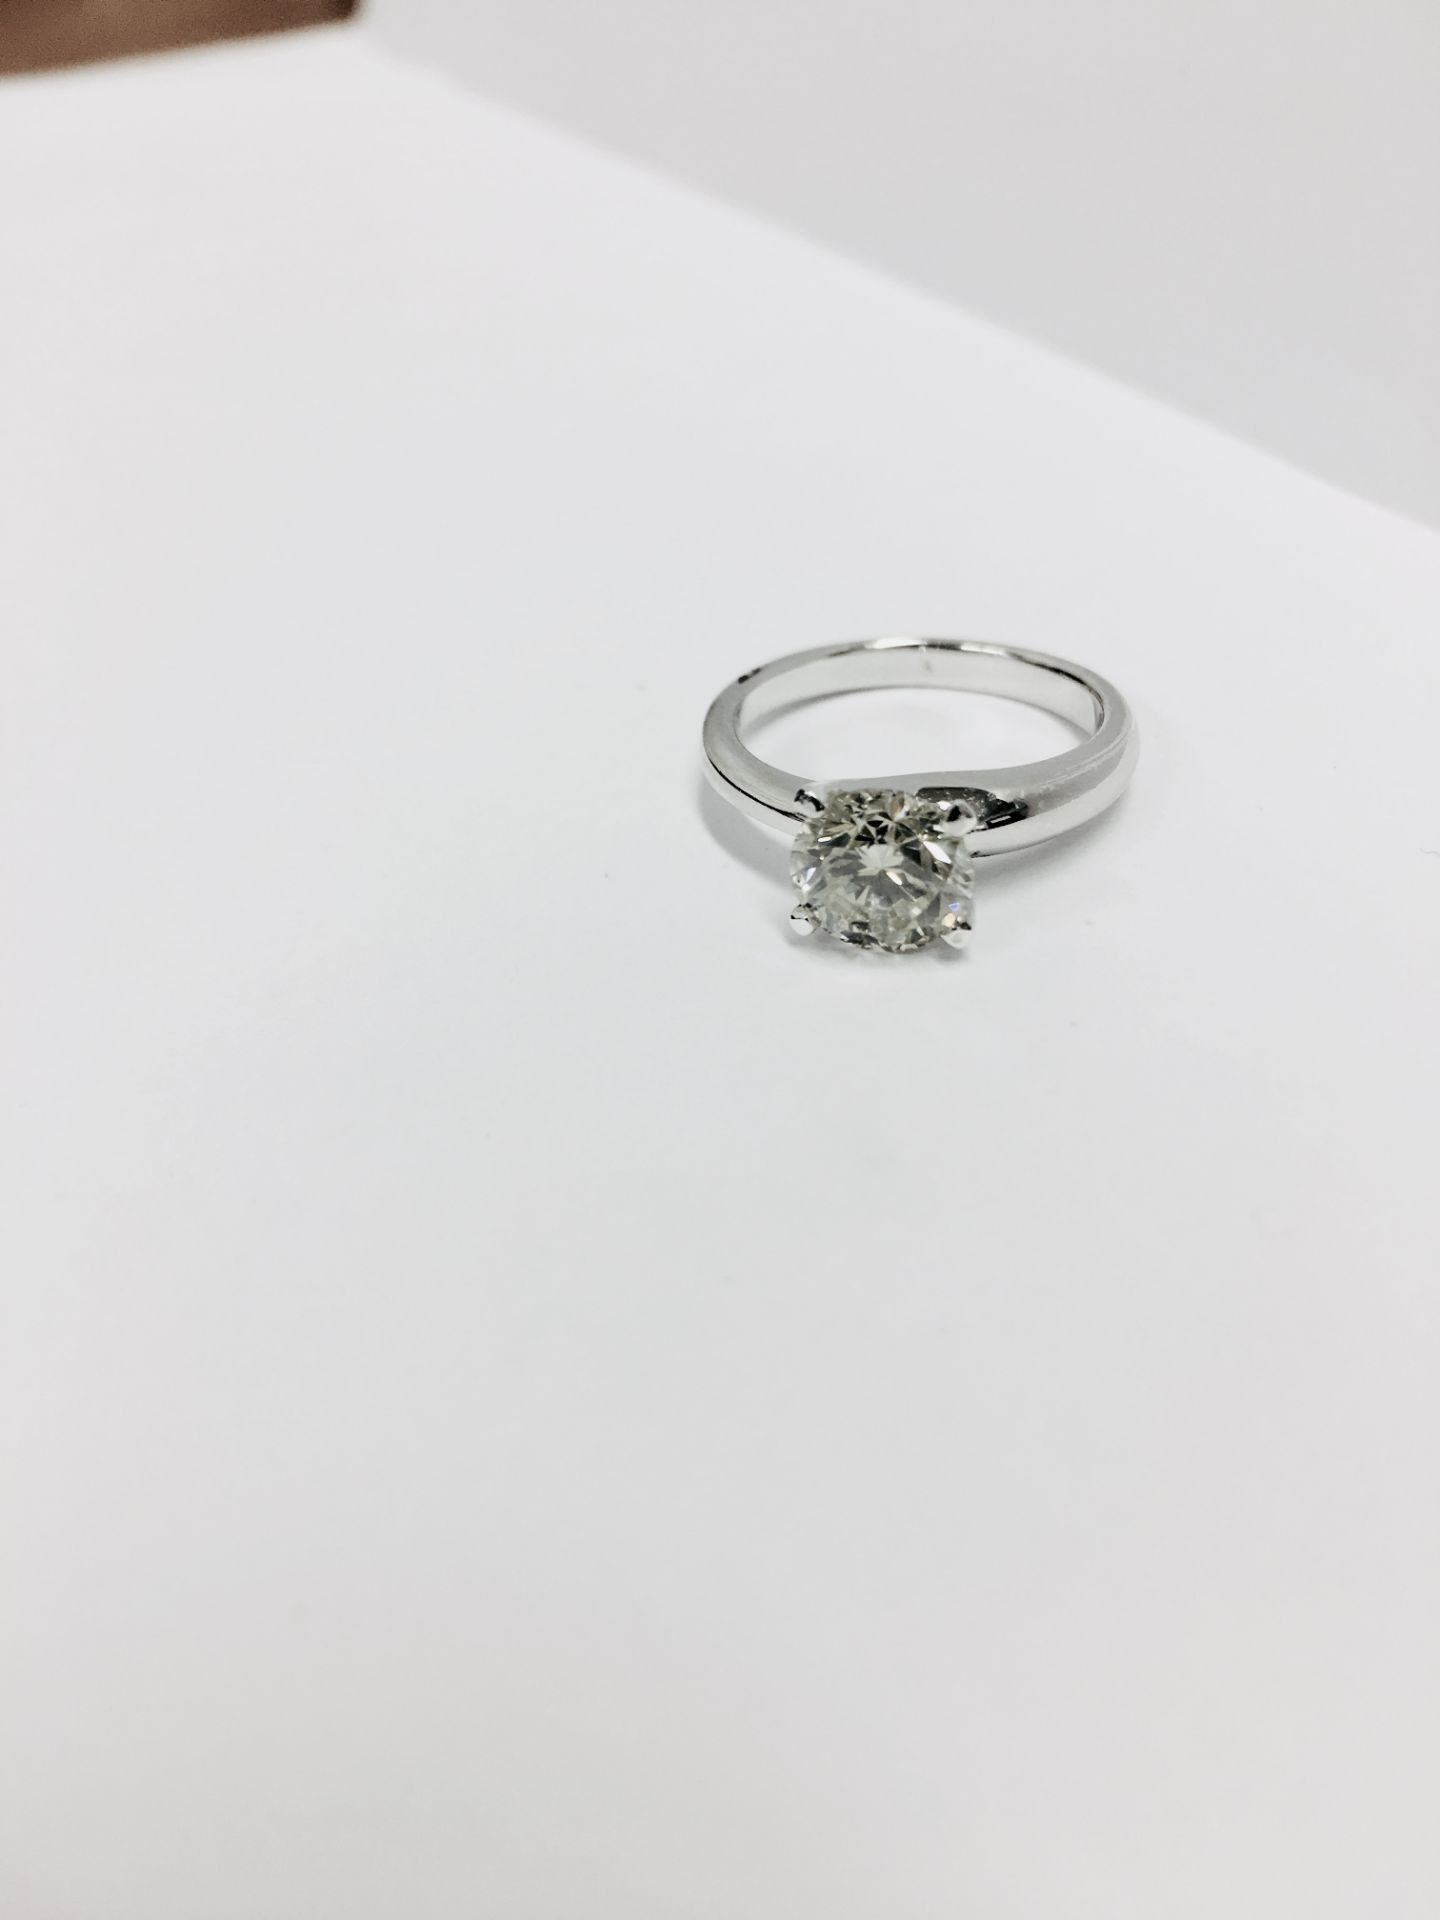 1.31ct diamond solitaire ring set in 18ct gold. G colour and I2 clarity. 4 claw setting. Enhanced